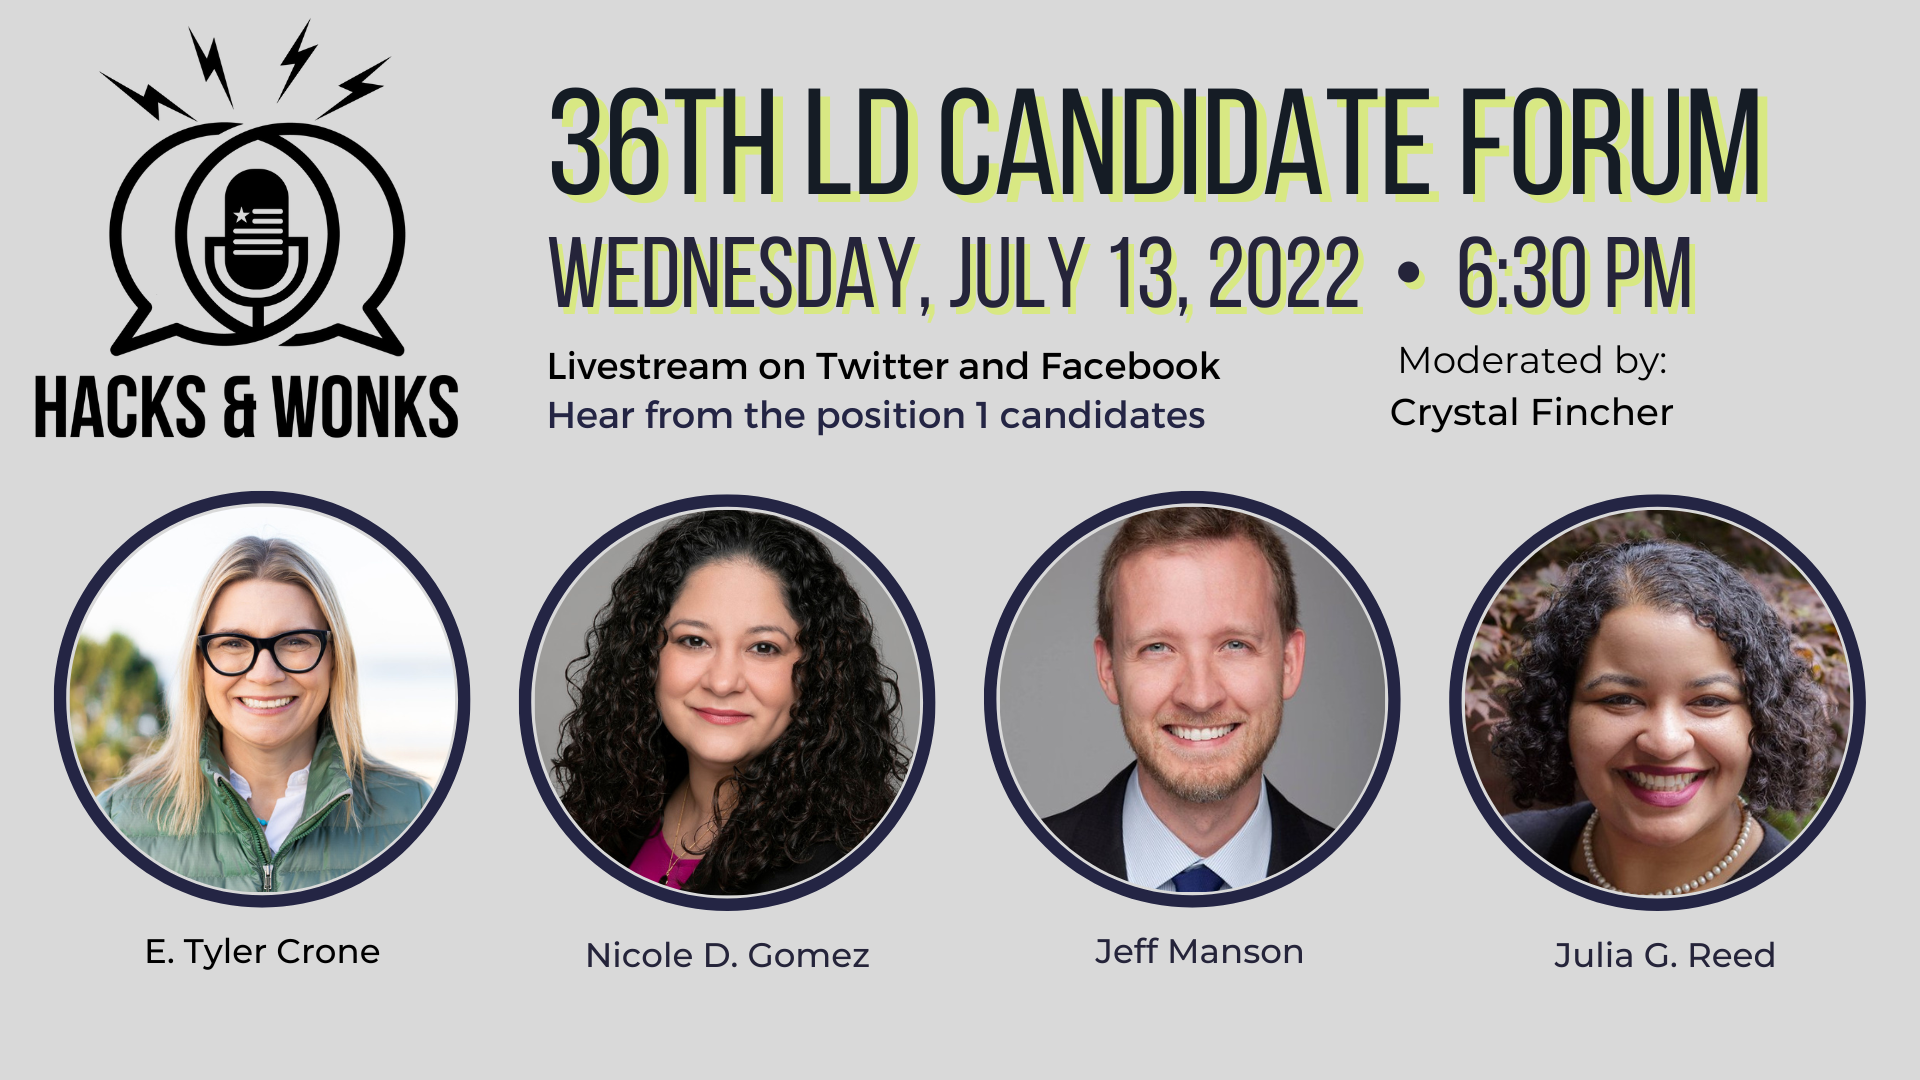 A graphic with the Hacks & Wonks show logo of a microphone surrounded by speech bubbles coming from opposite directions topped by lightning bolts, that says 36th LD Candidate Forum, Wednesday, July 13th, 2022 6:30pm Livestream on Twitter and Facebook